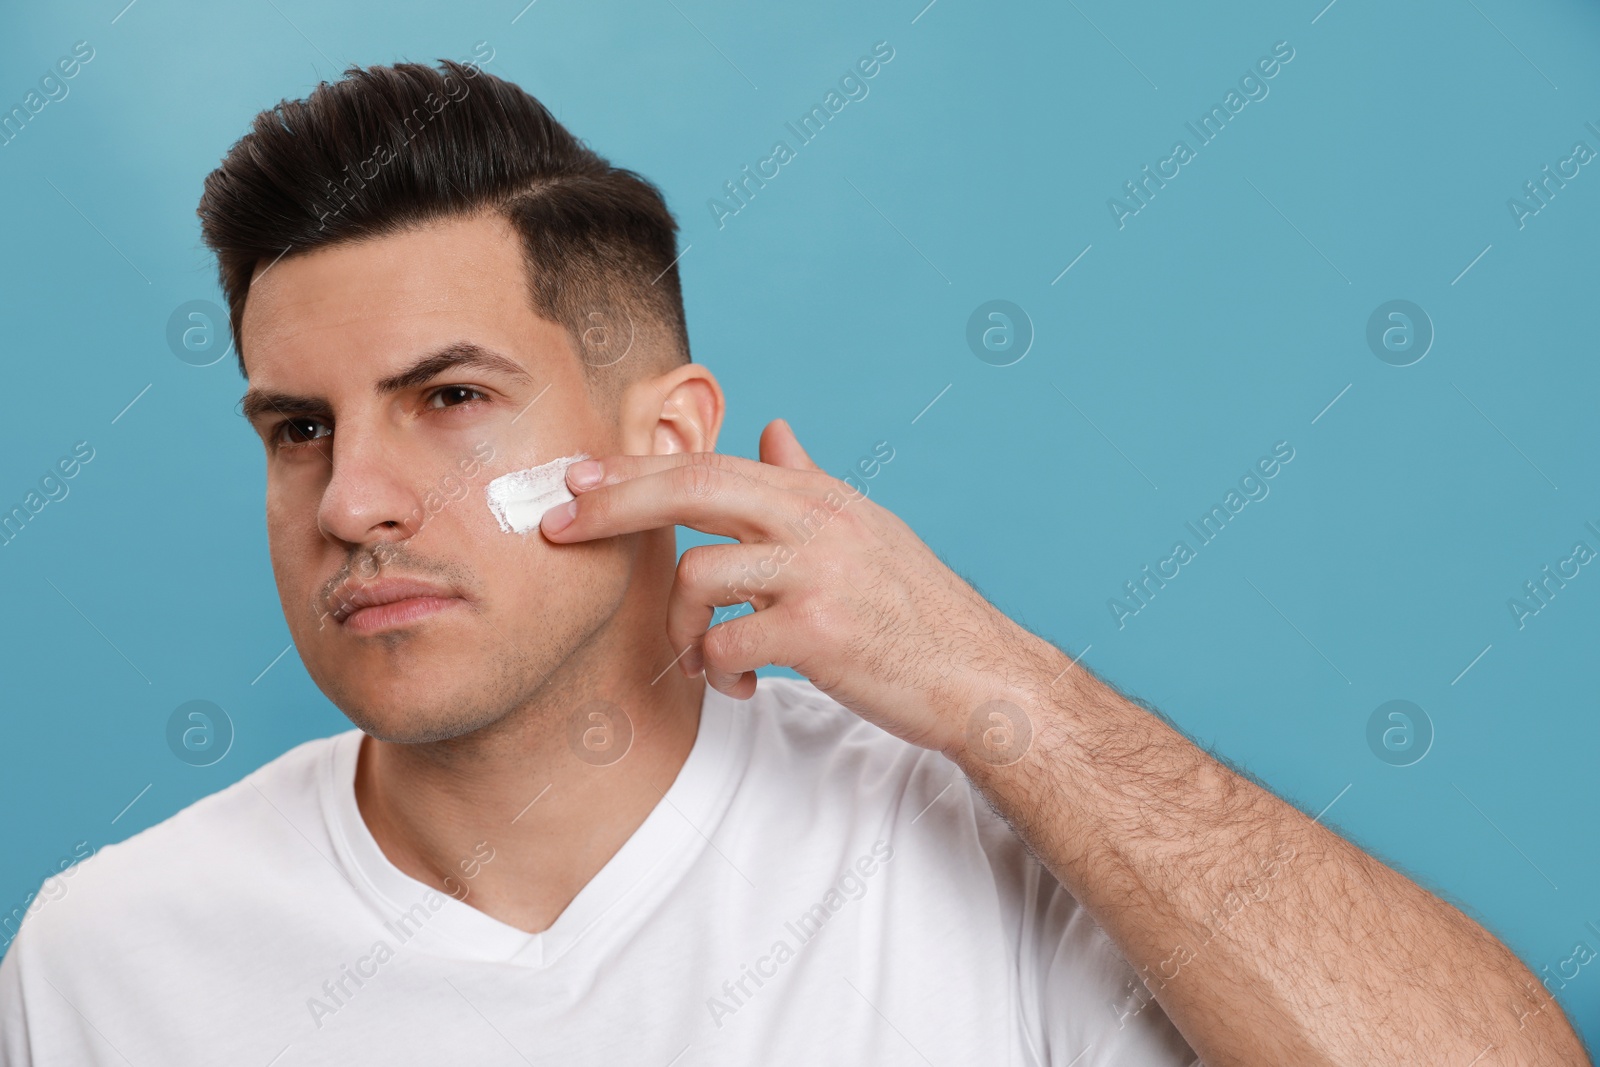 Photo of Handsome man applying face cream against turquoise background